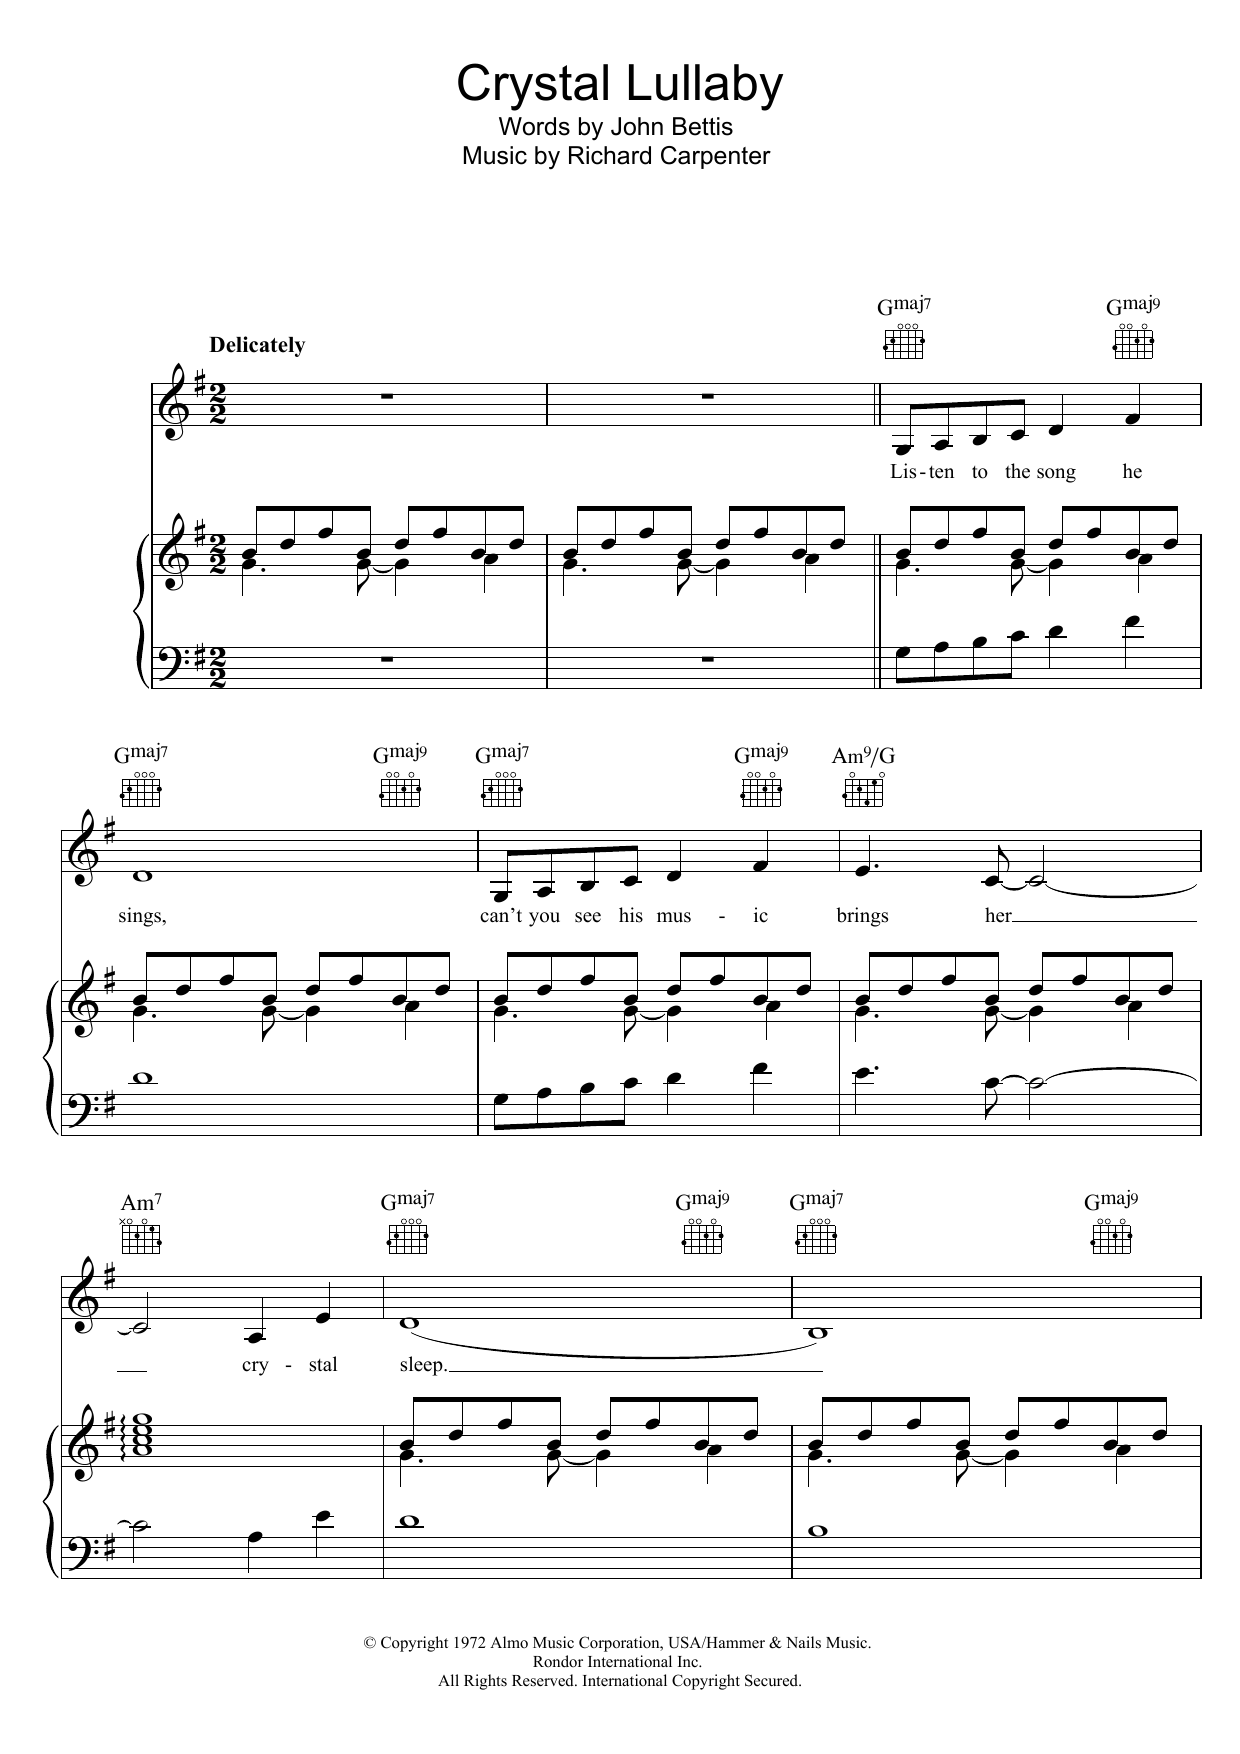 Download Carpenters Crystal Lullaby Sheet Music